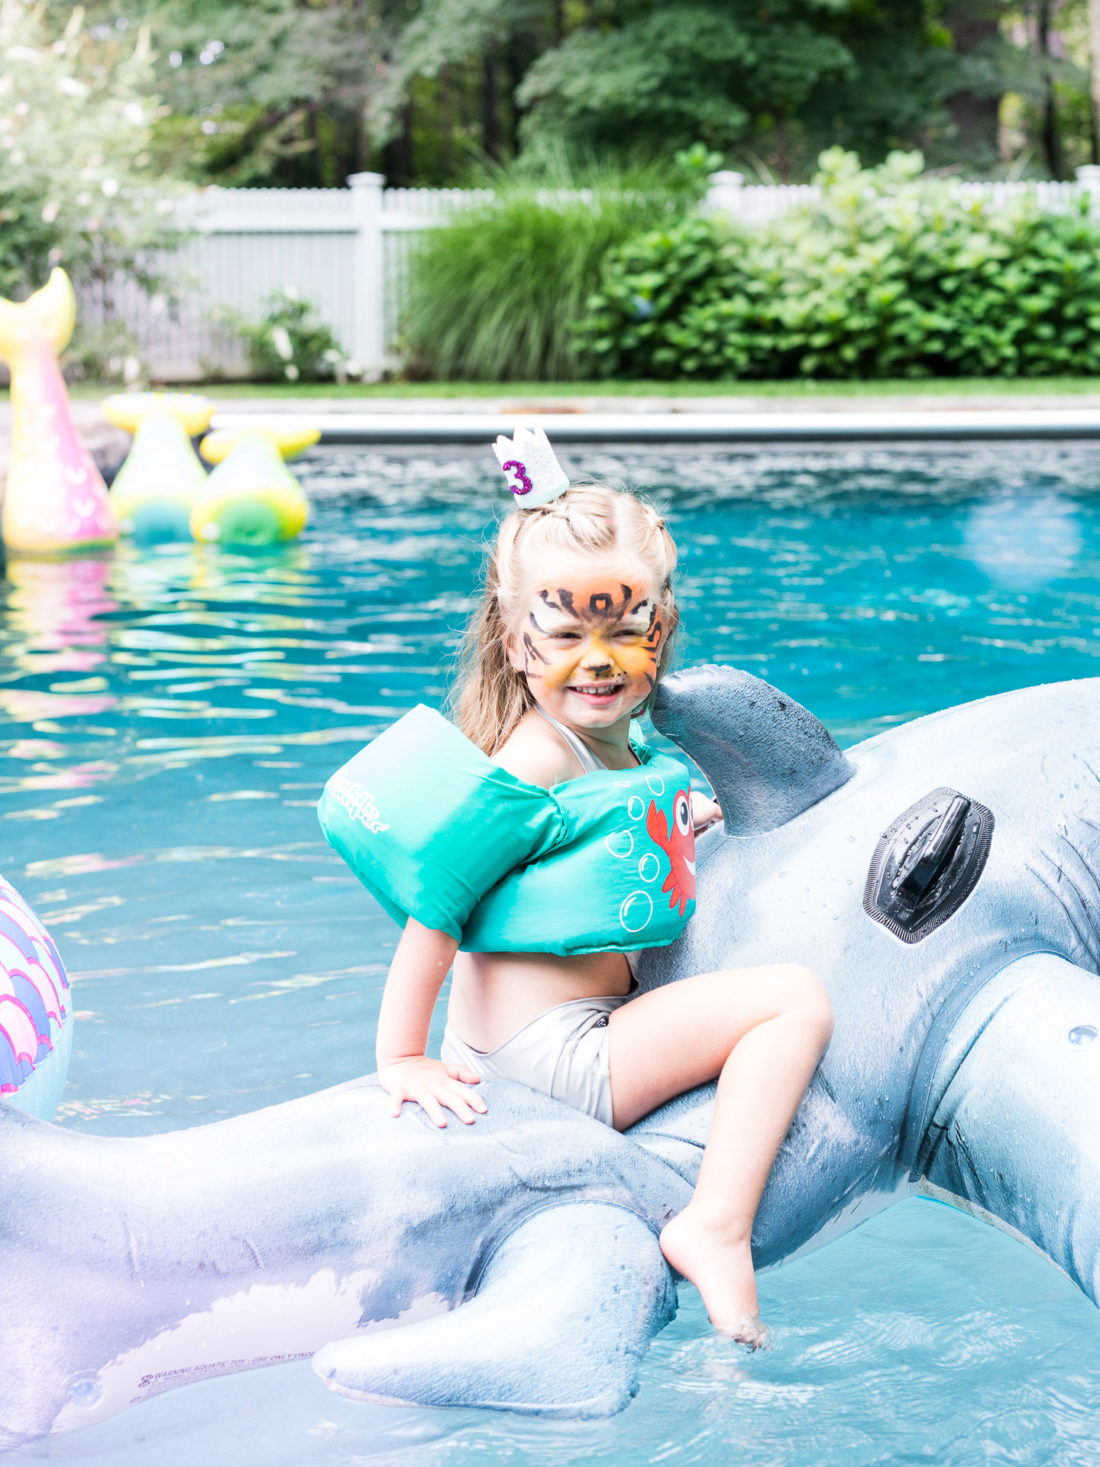 Marlowe Martino rides on a shark pool float in the pool of her Connecticut home at her third birthday party